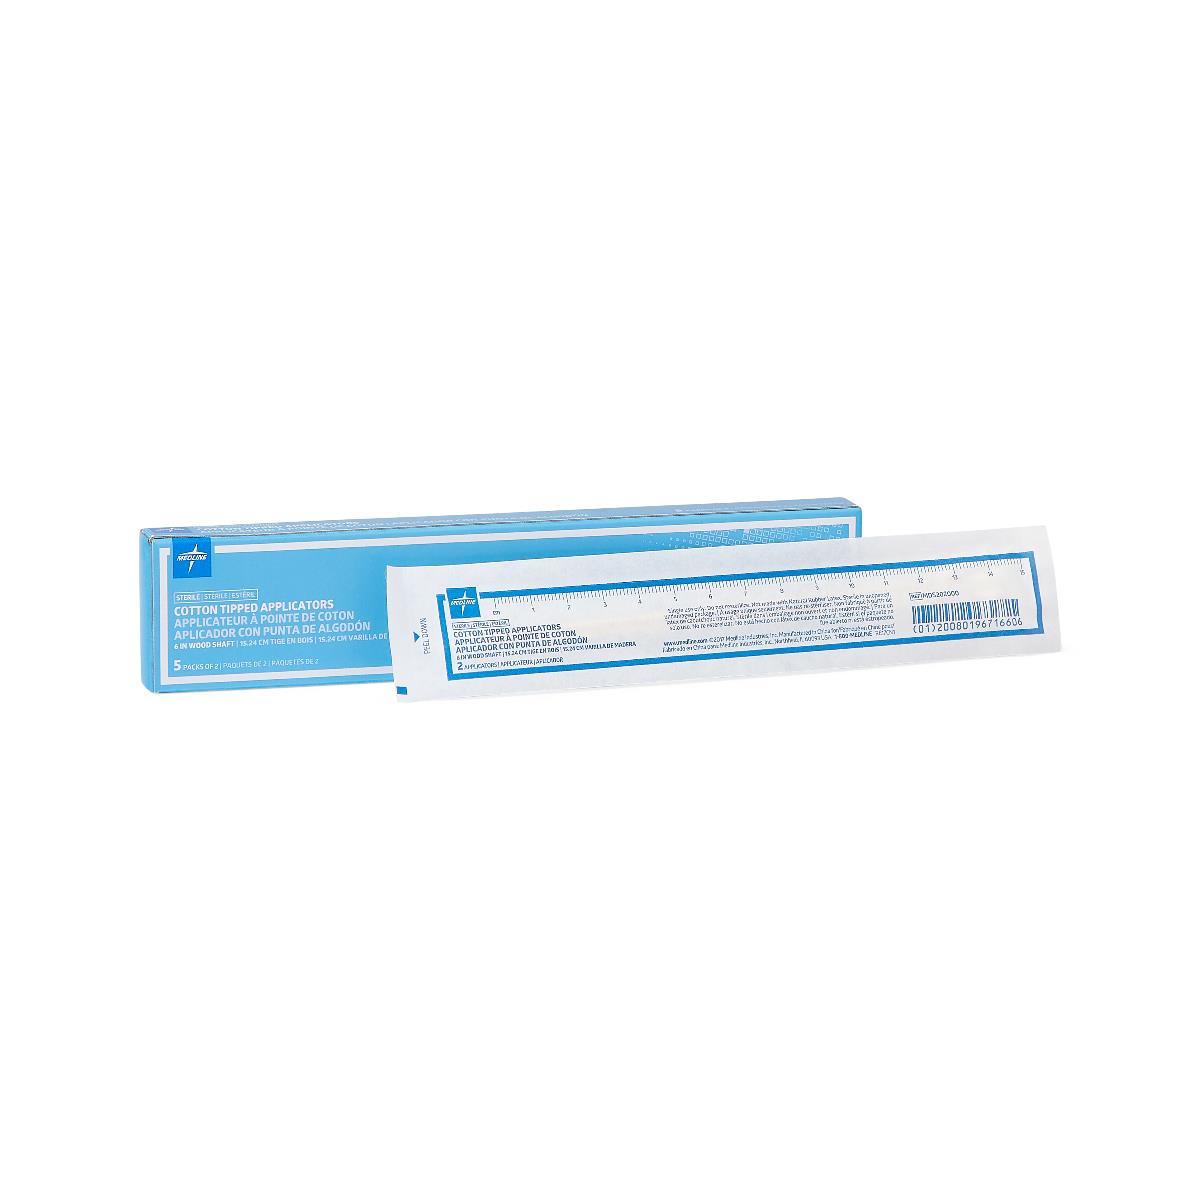 5 Pair-Pack / 6.00 IN / 6.00000 IN Exam & Diagnostic Supplies - MEDLINE - Wasatch Medical Supply